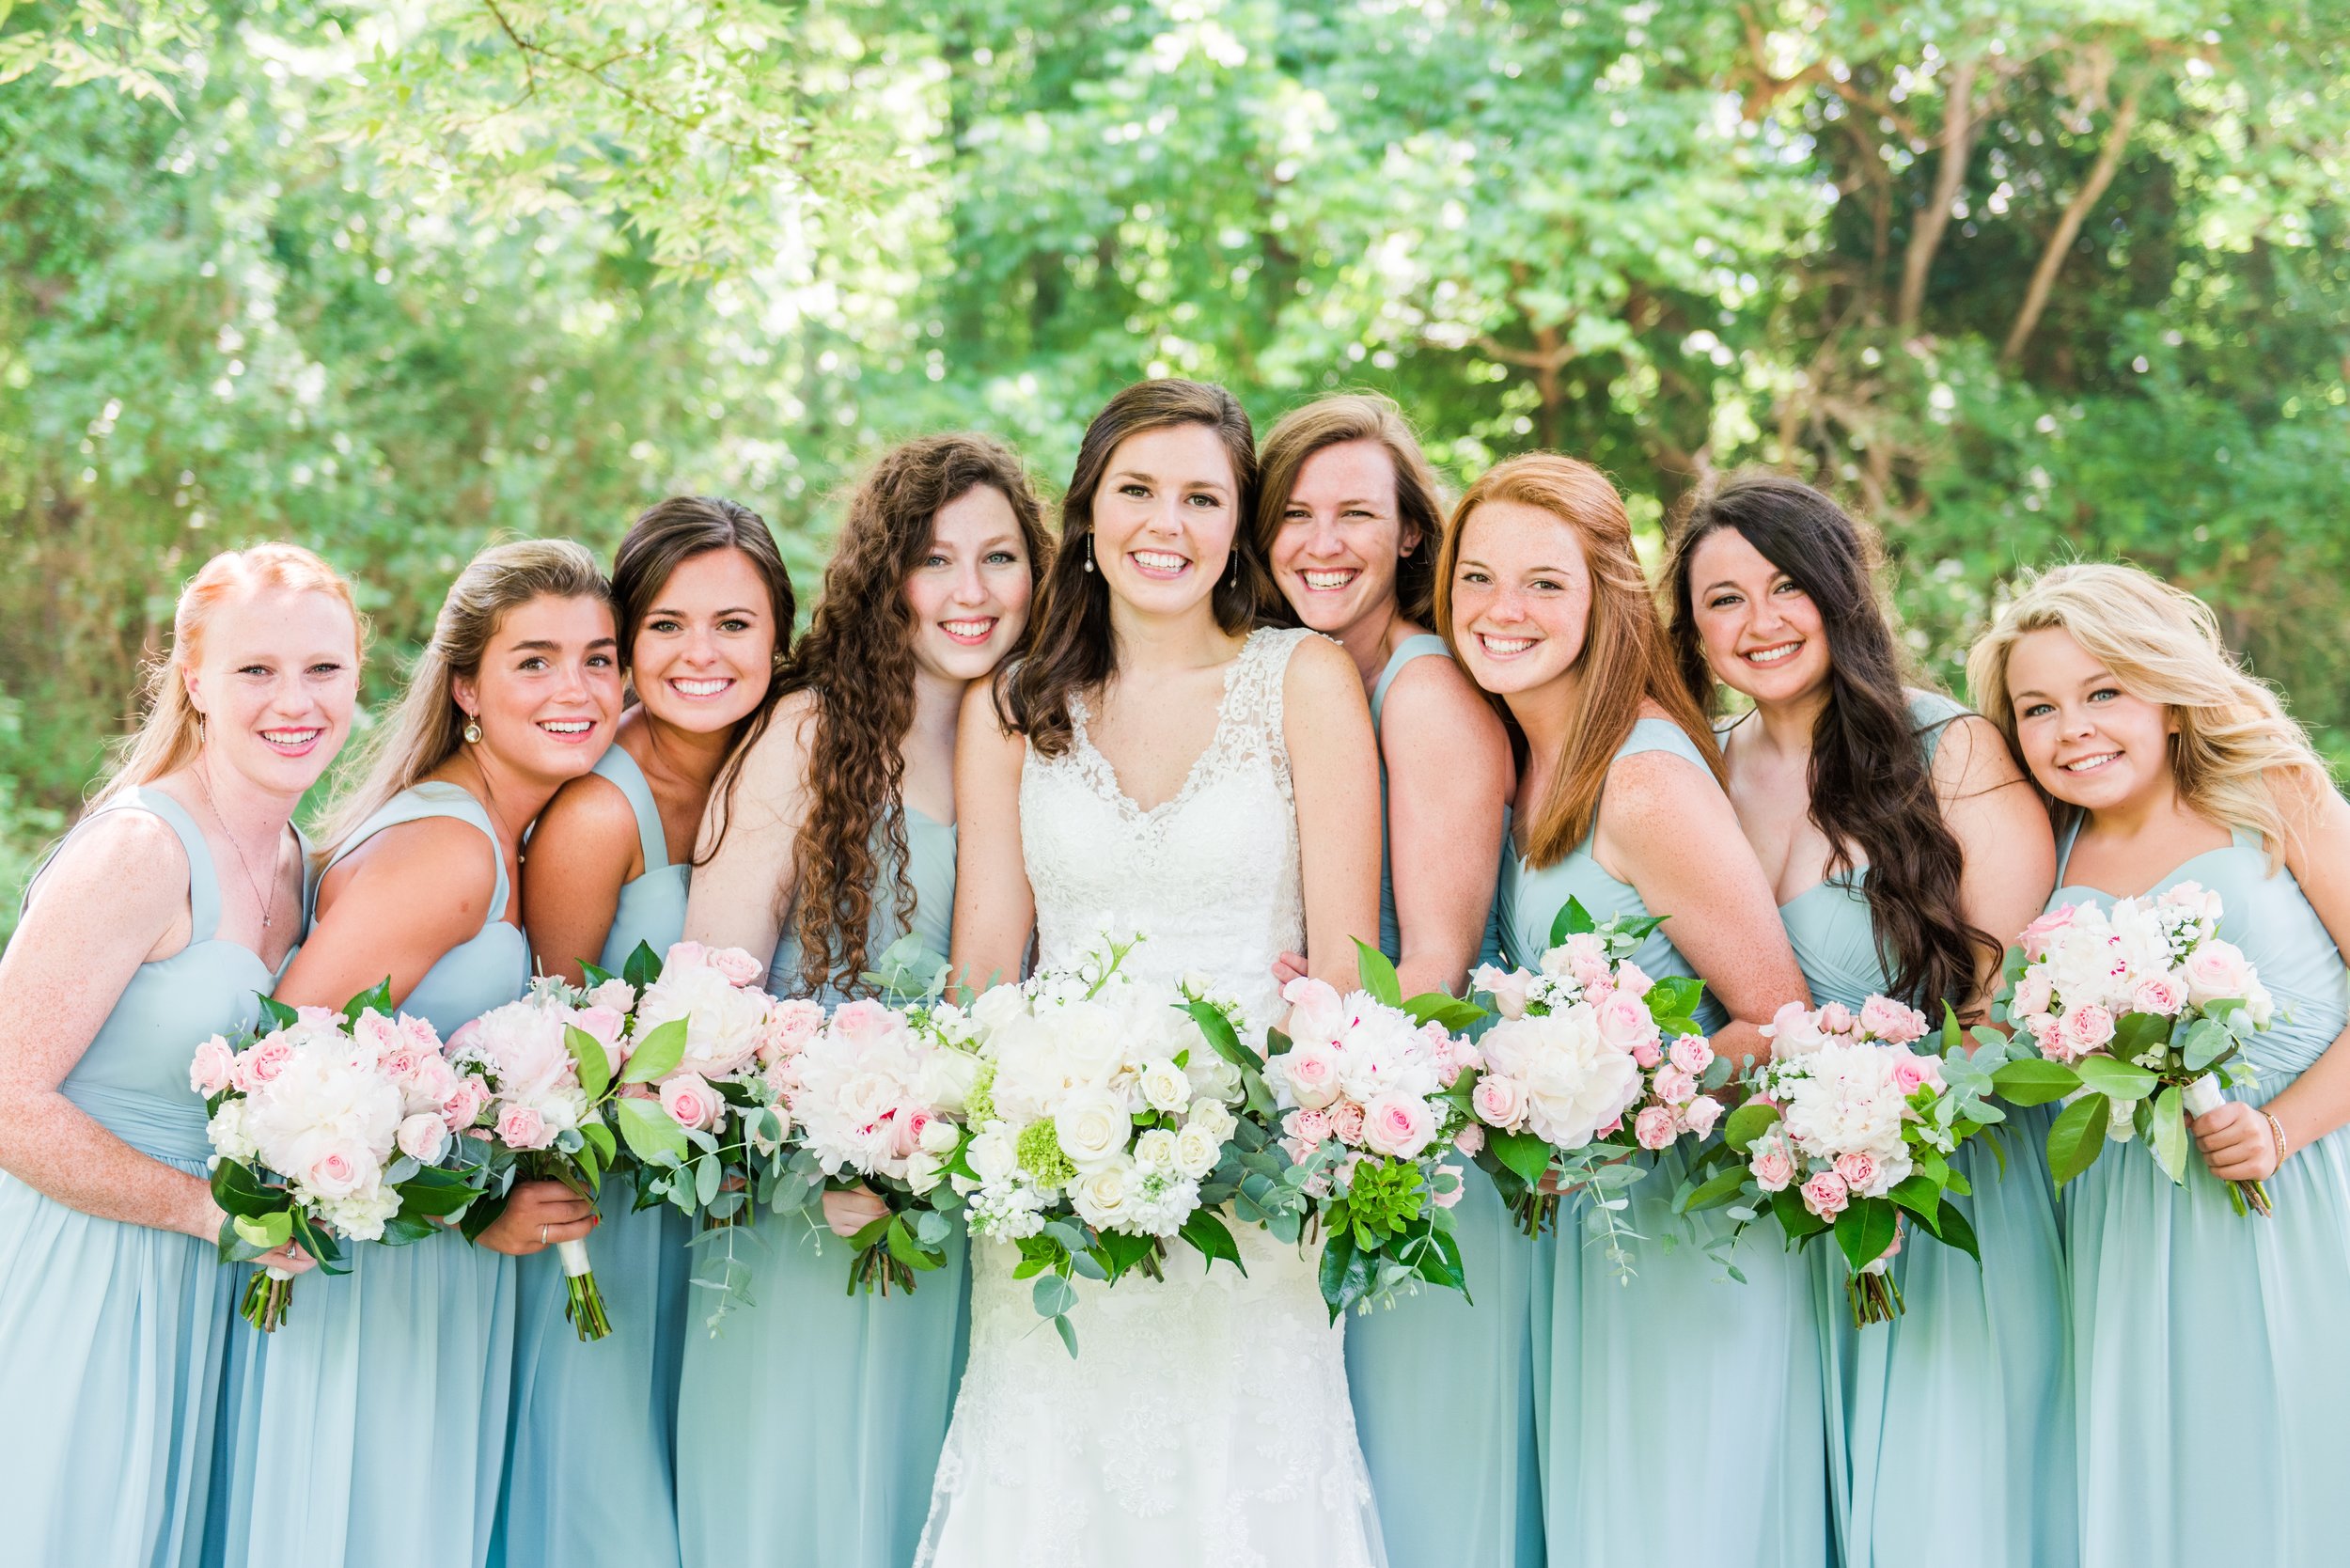 Bridal Party | Kimberly Cauble Photography